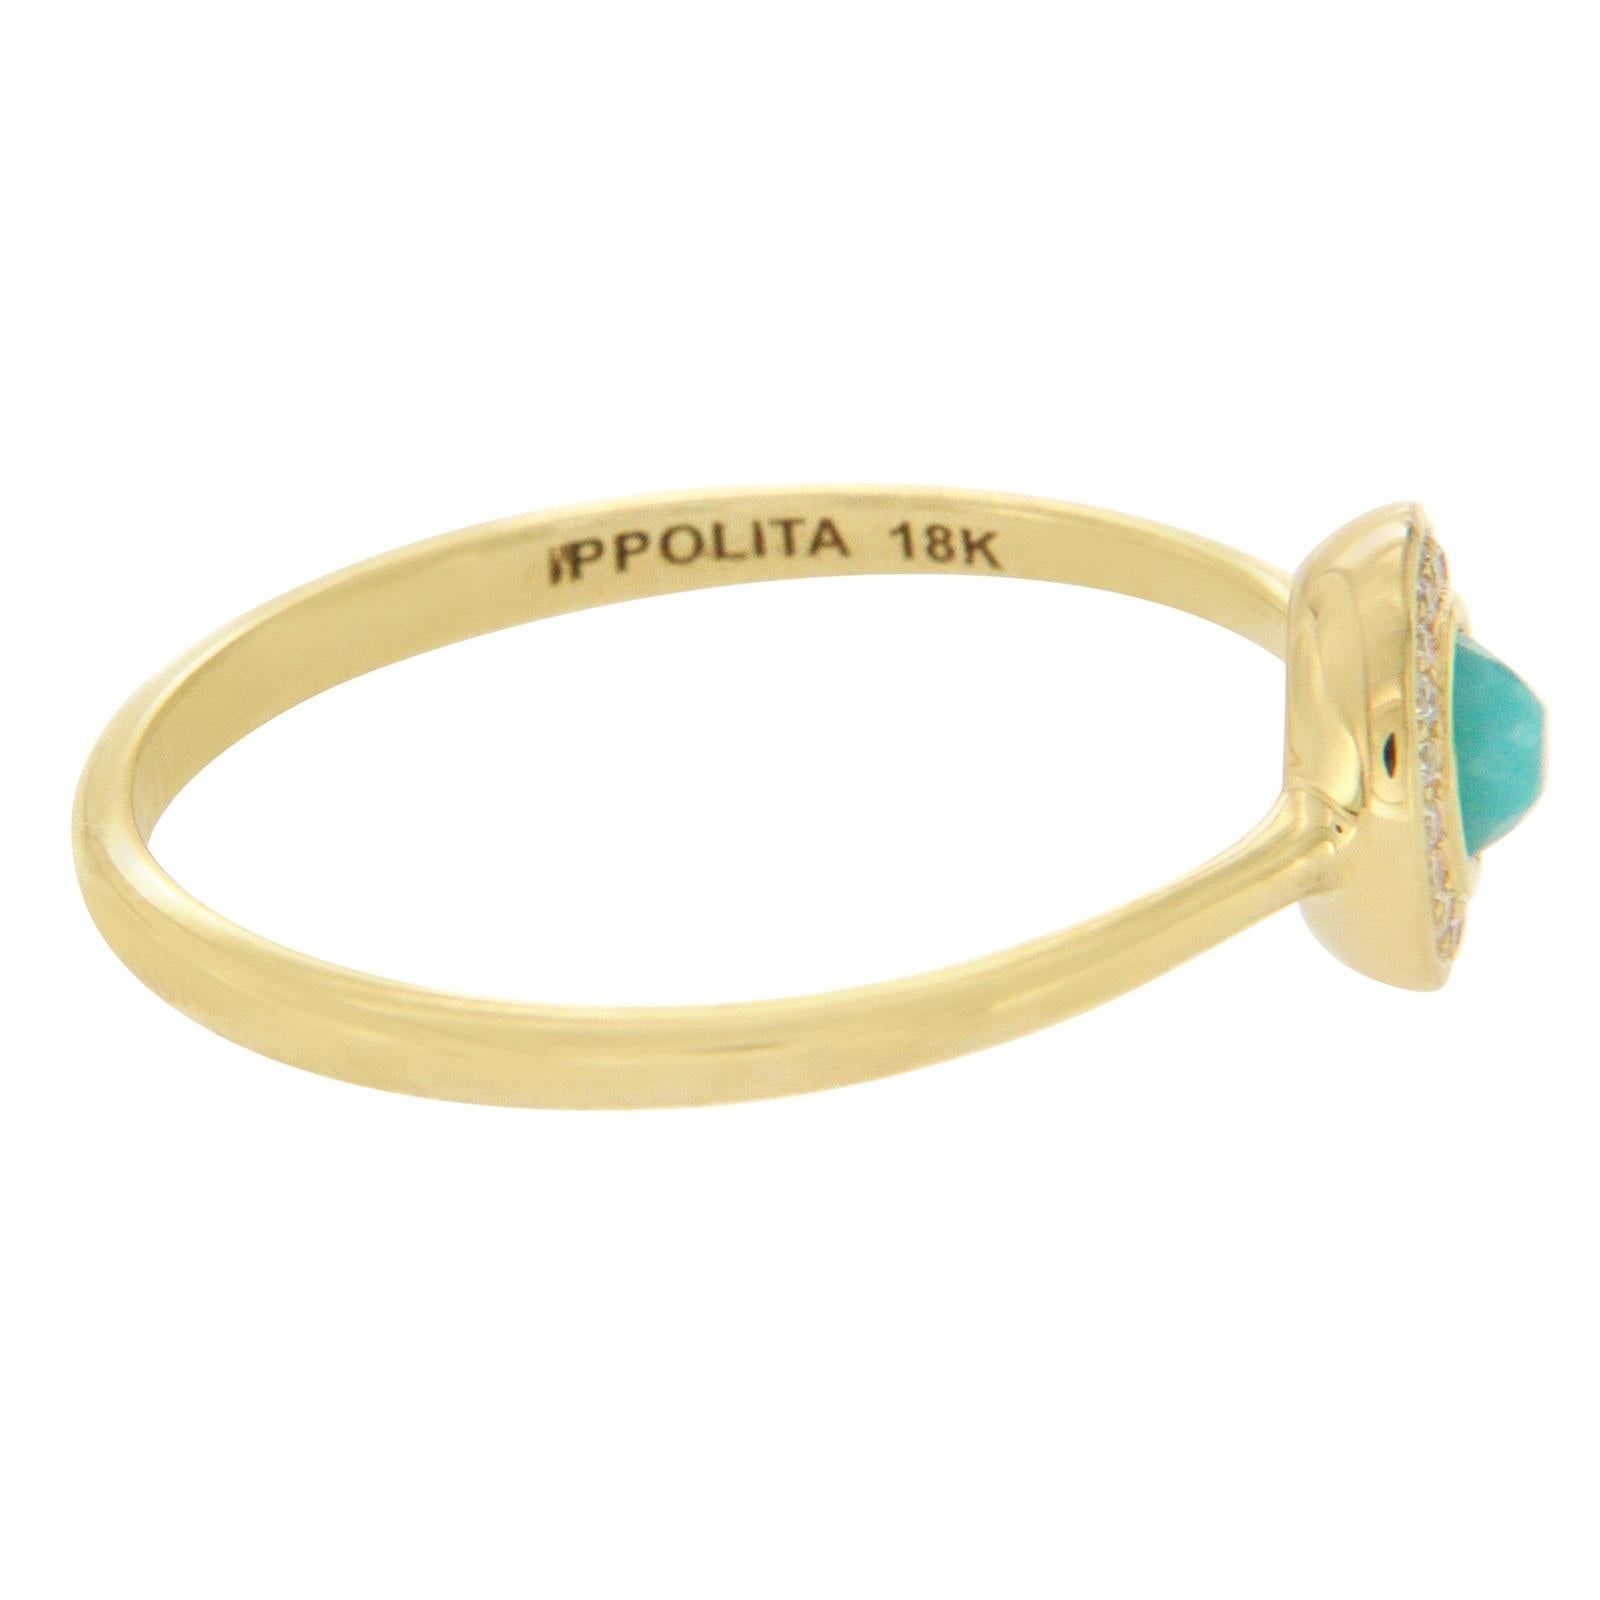 Type: Ring
Top: 7 mm
Band Width: 1.7 mm
Metal: Yellow Gold
Metal Purity: 18K
Retail Price:$895
Hallmarks: Ippolita 18K
Total Weight: 2.2 Grams
Stone Type: Diamonds and Turquoise
Condition: New
Stock Number: U515